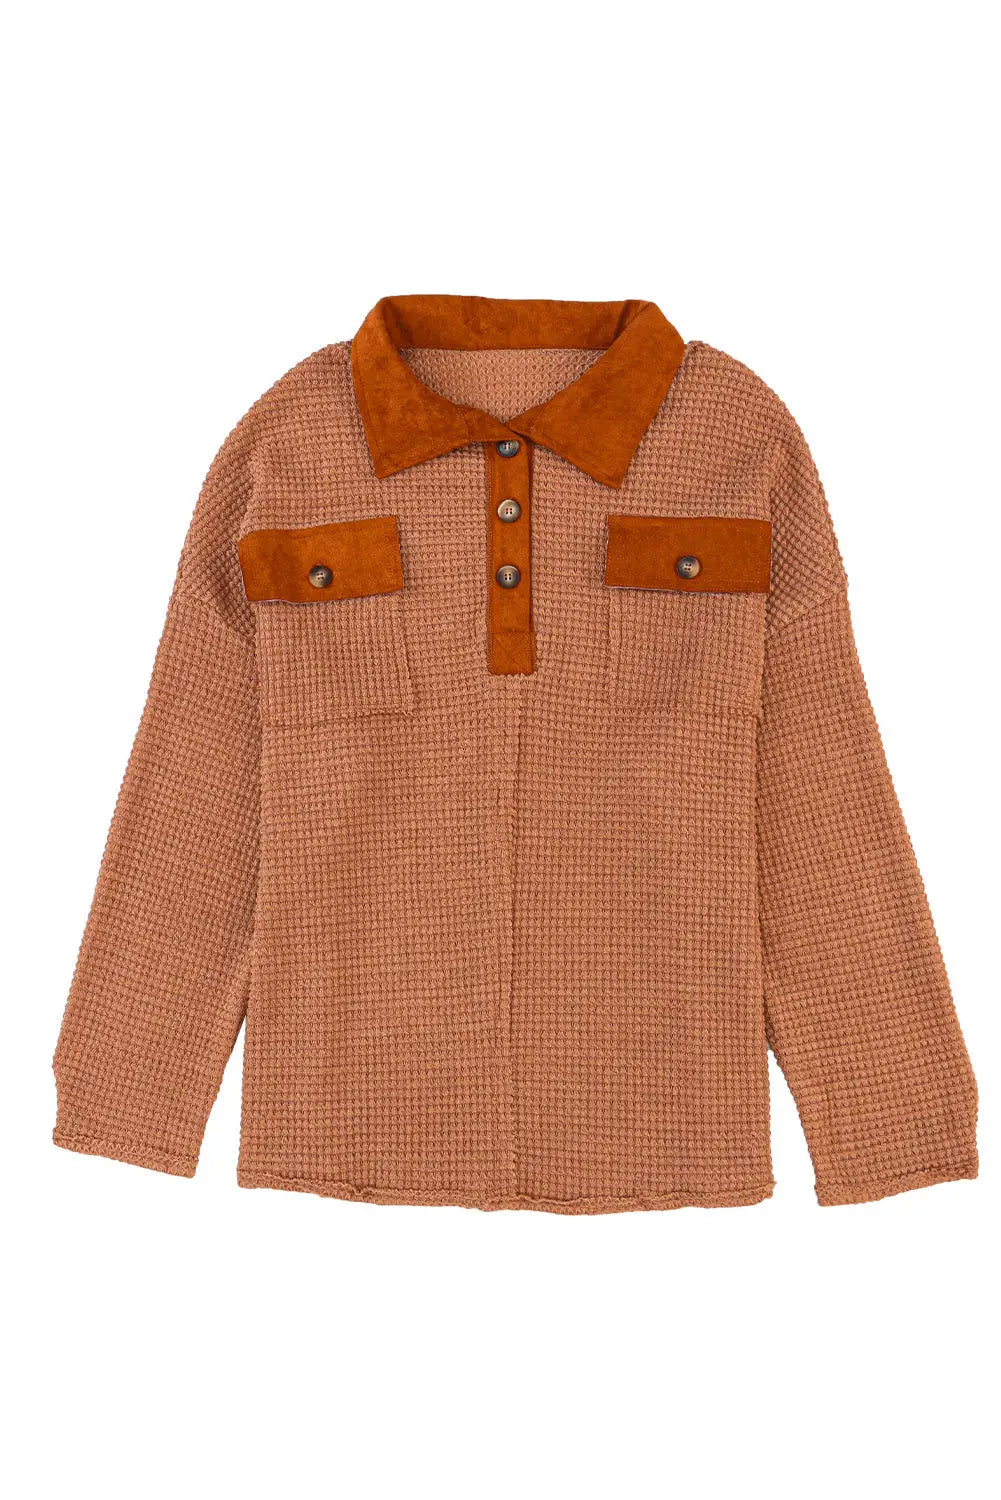 Brown waffle knit button contrast trim long sleeve top - tops